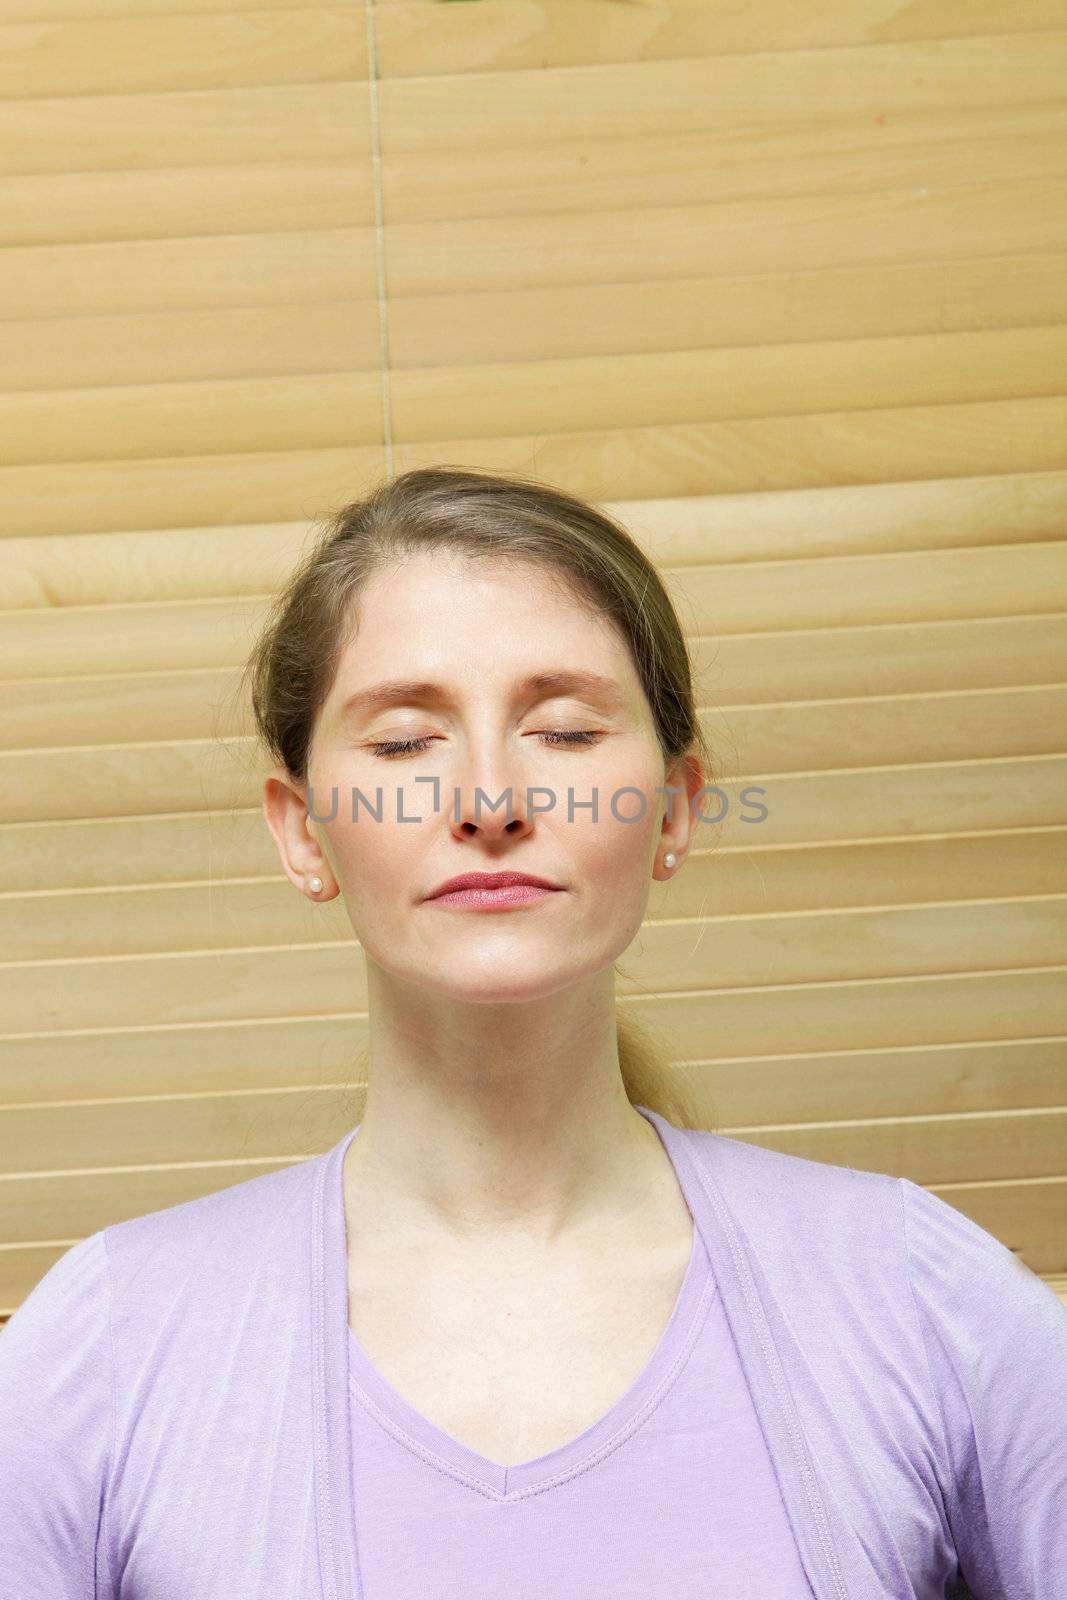 Head and shoulders portrait of an attractive middle-aged woman meditating with her eyes closed